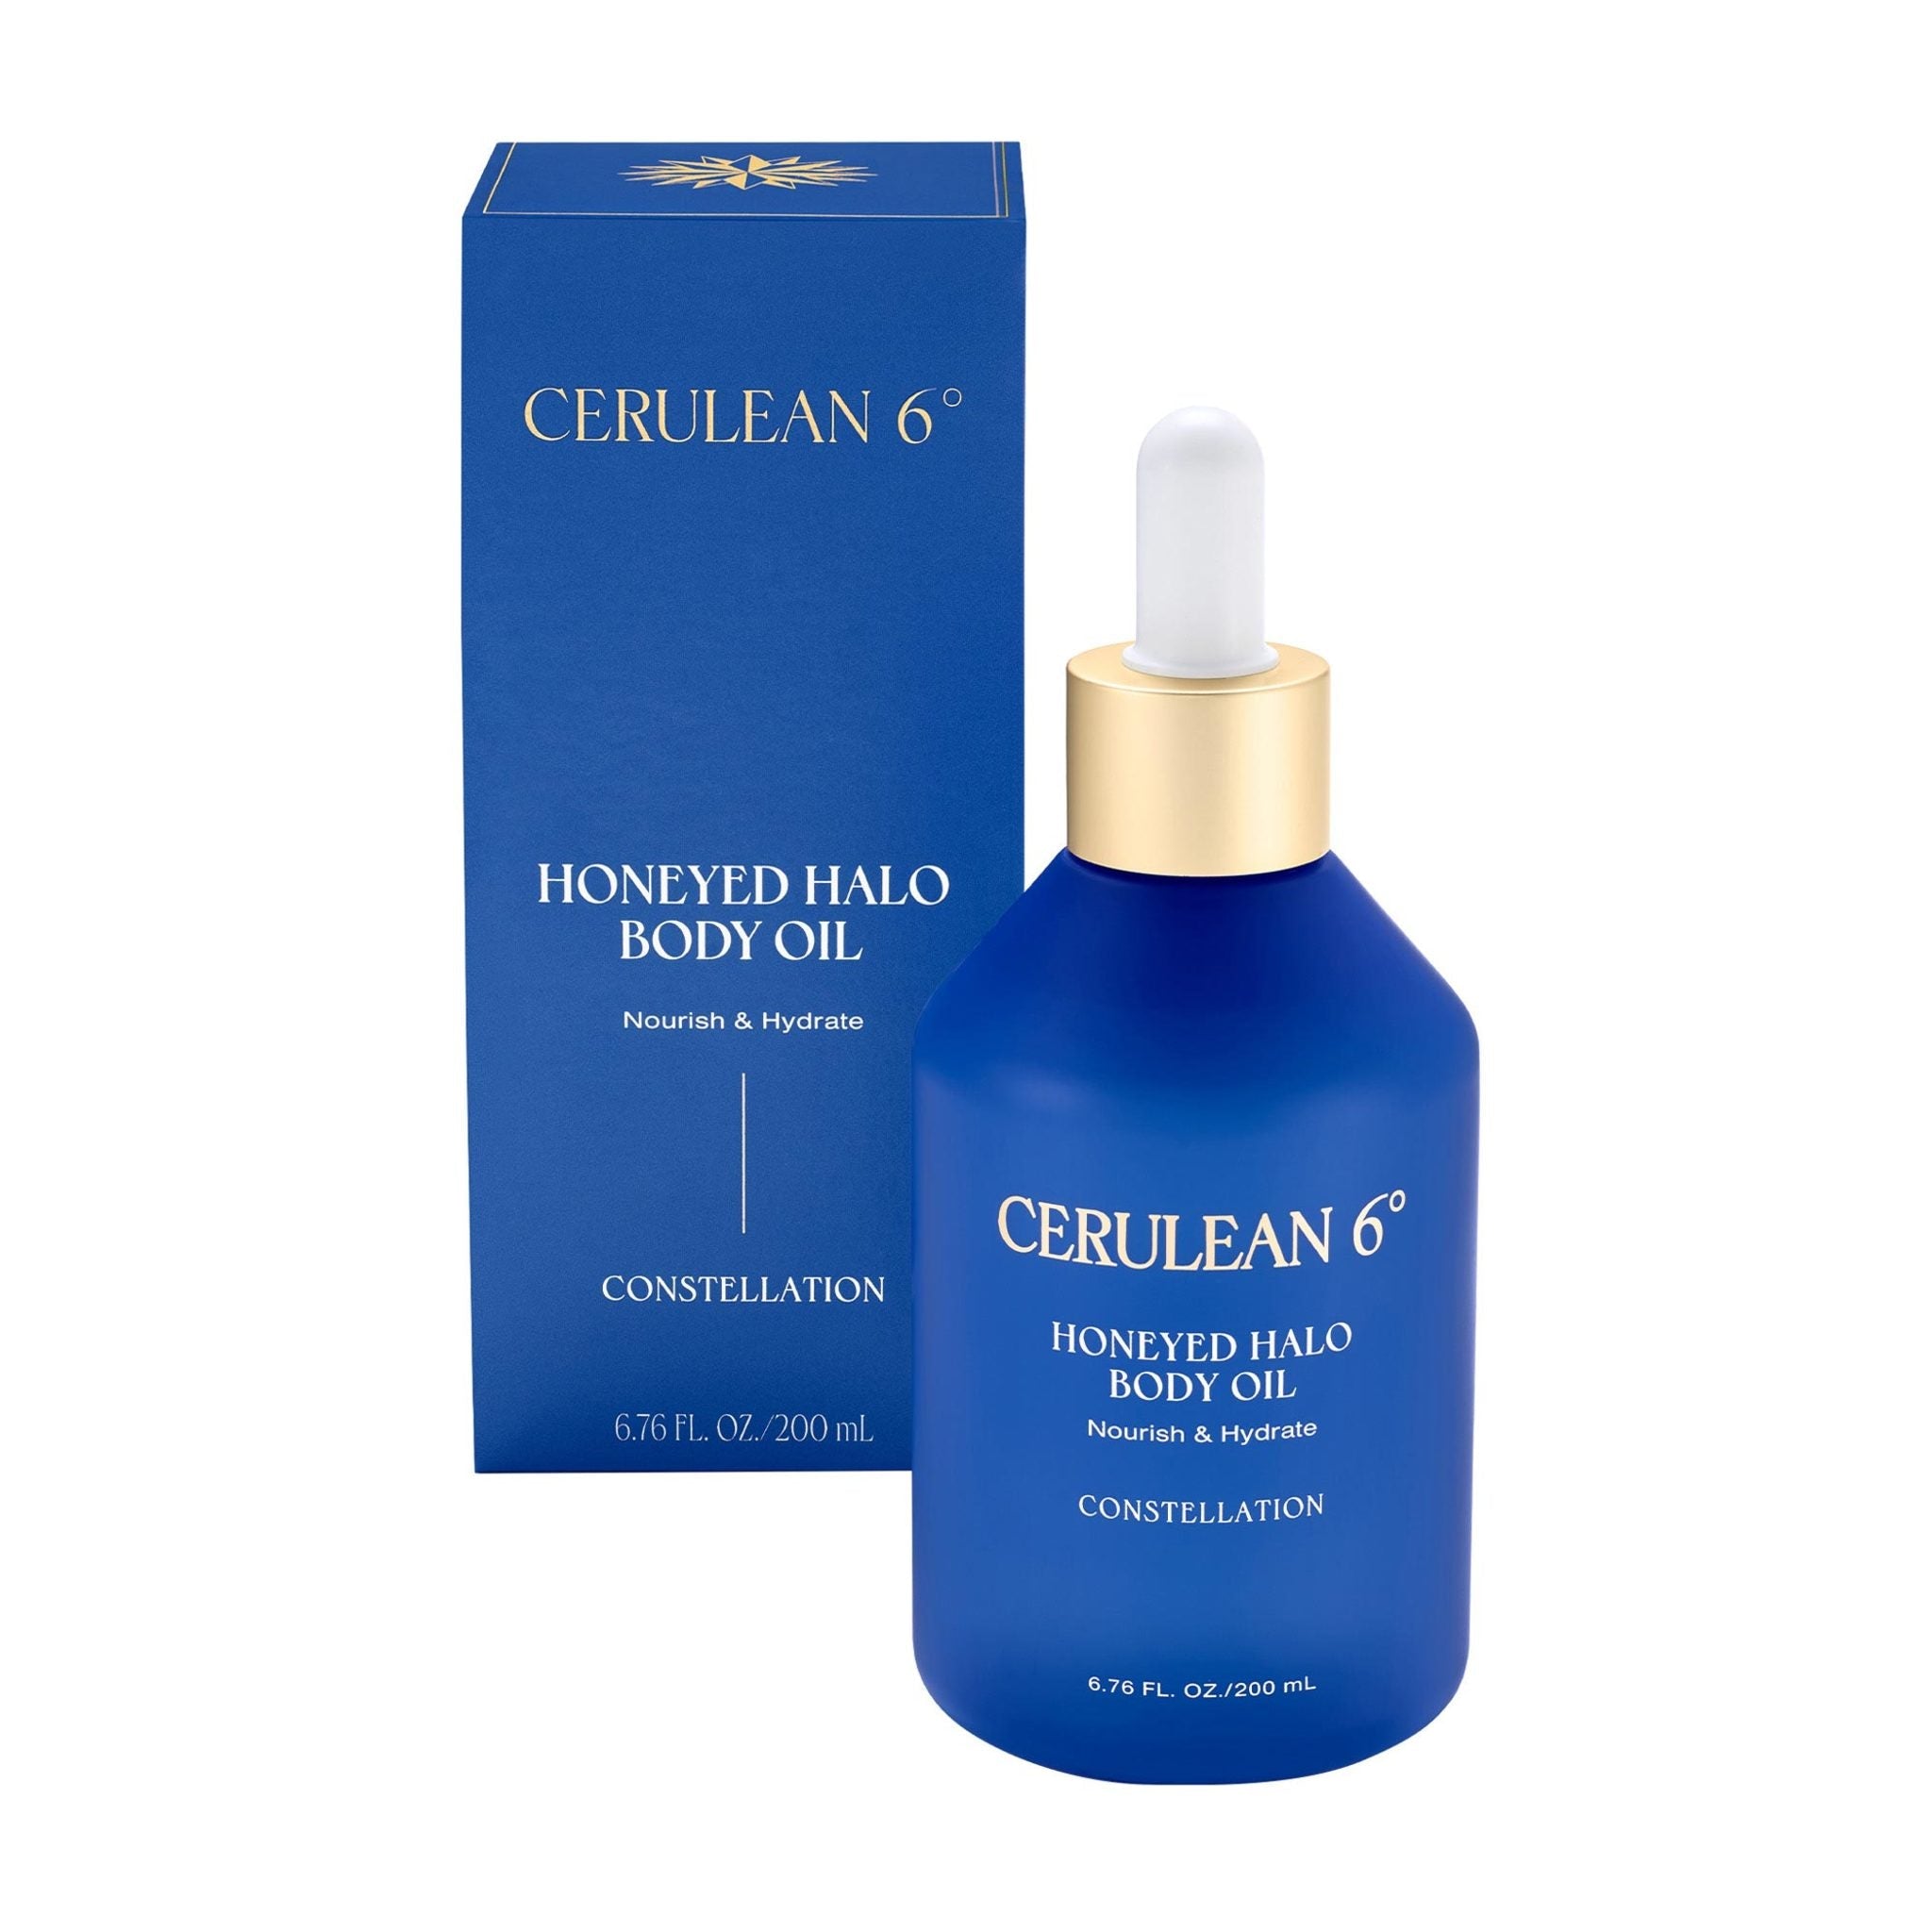 Cerulean 6 Honeyed Halo Body Oil in Constellation main image.